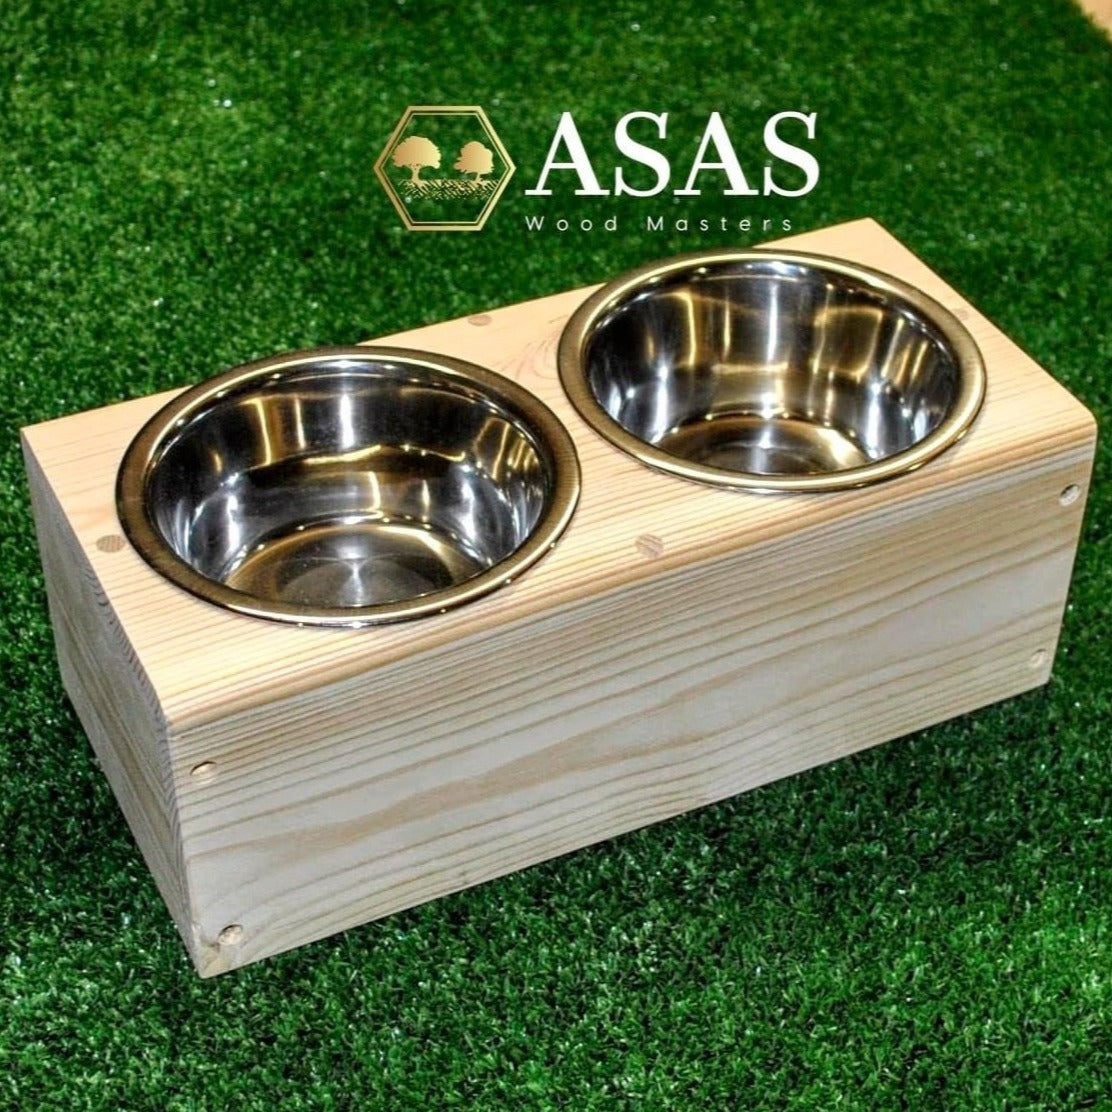 Food and Drink bowls station, made by asaswood